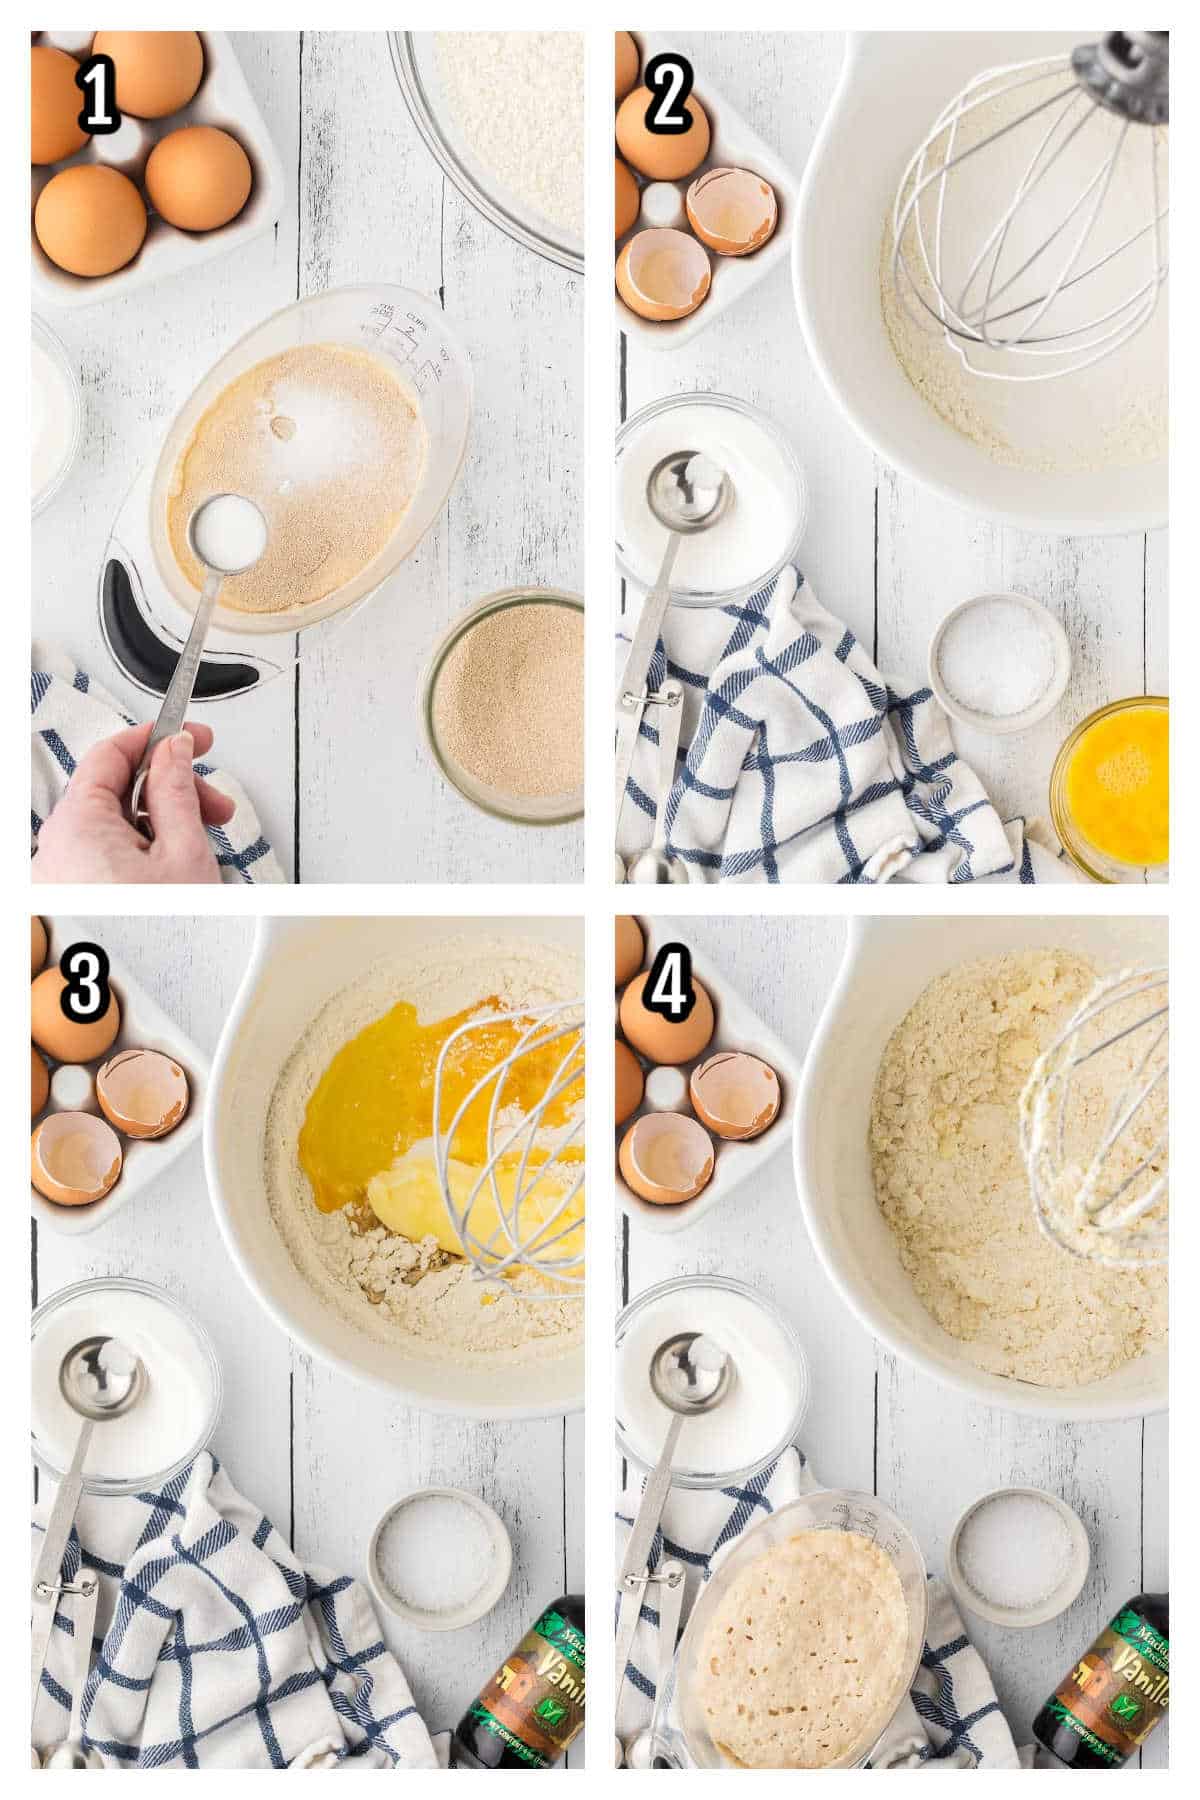 The first Collage shows the beginning steps of making the sweet roll dough. 